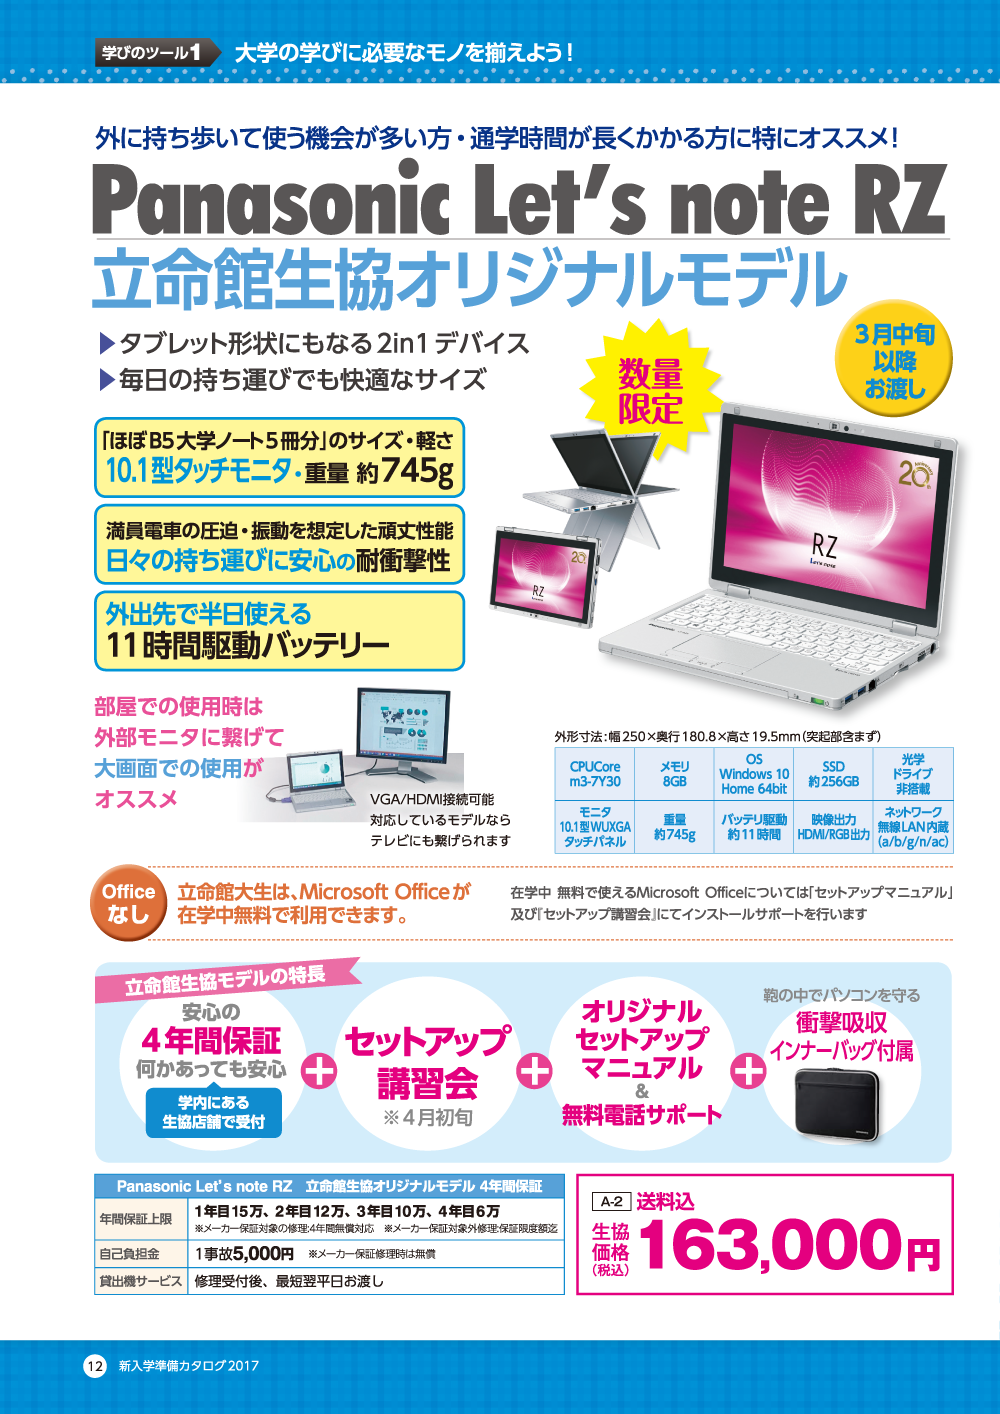 http://www.ritsco-op.jp/pickup/9bc34ca8618b93e783a8bfe7b13ba4a266f9a377.png